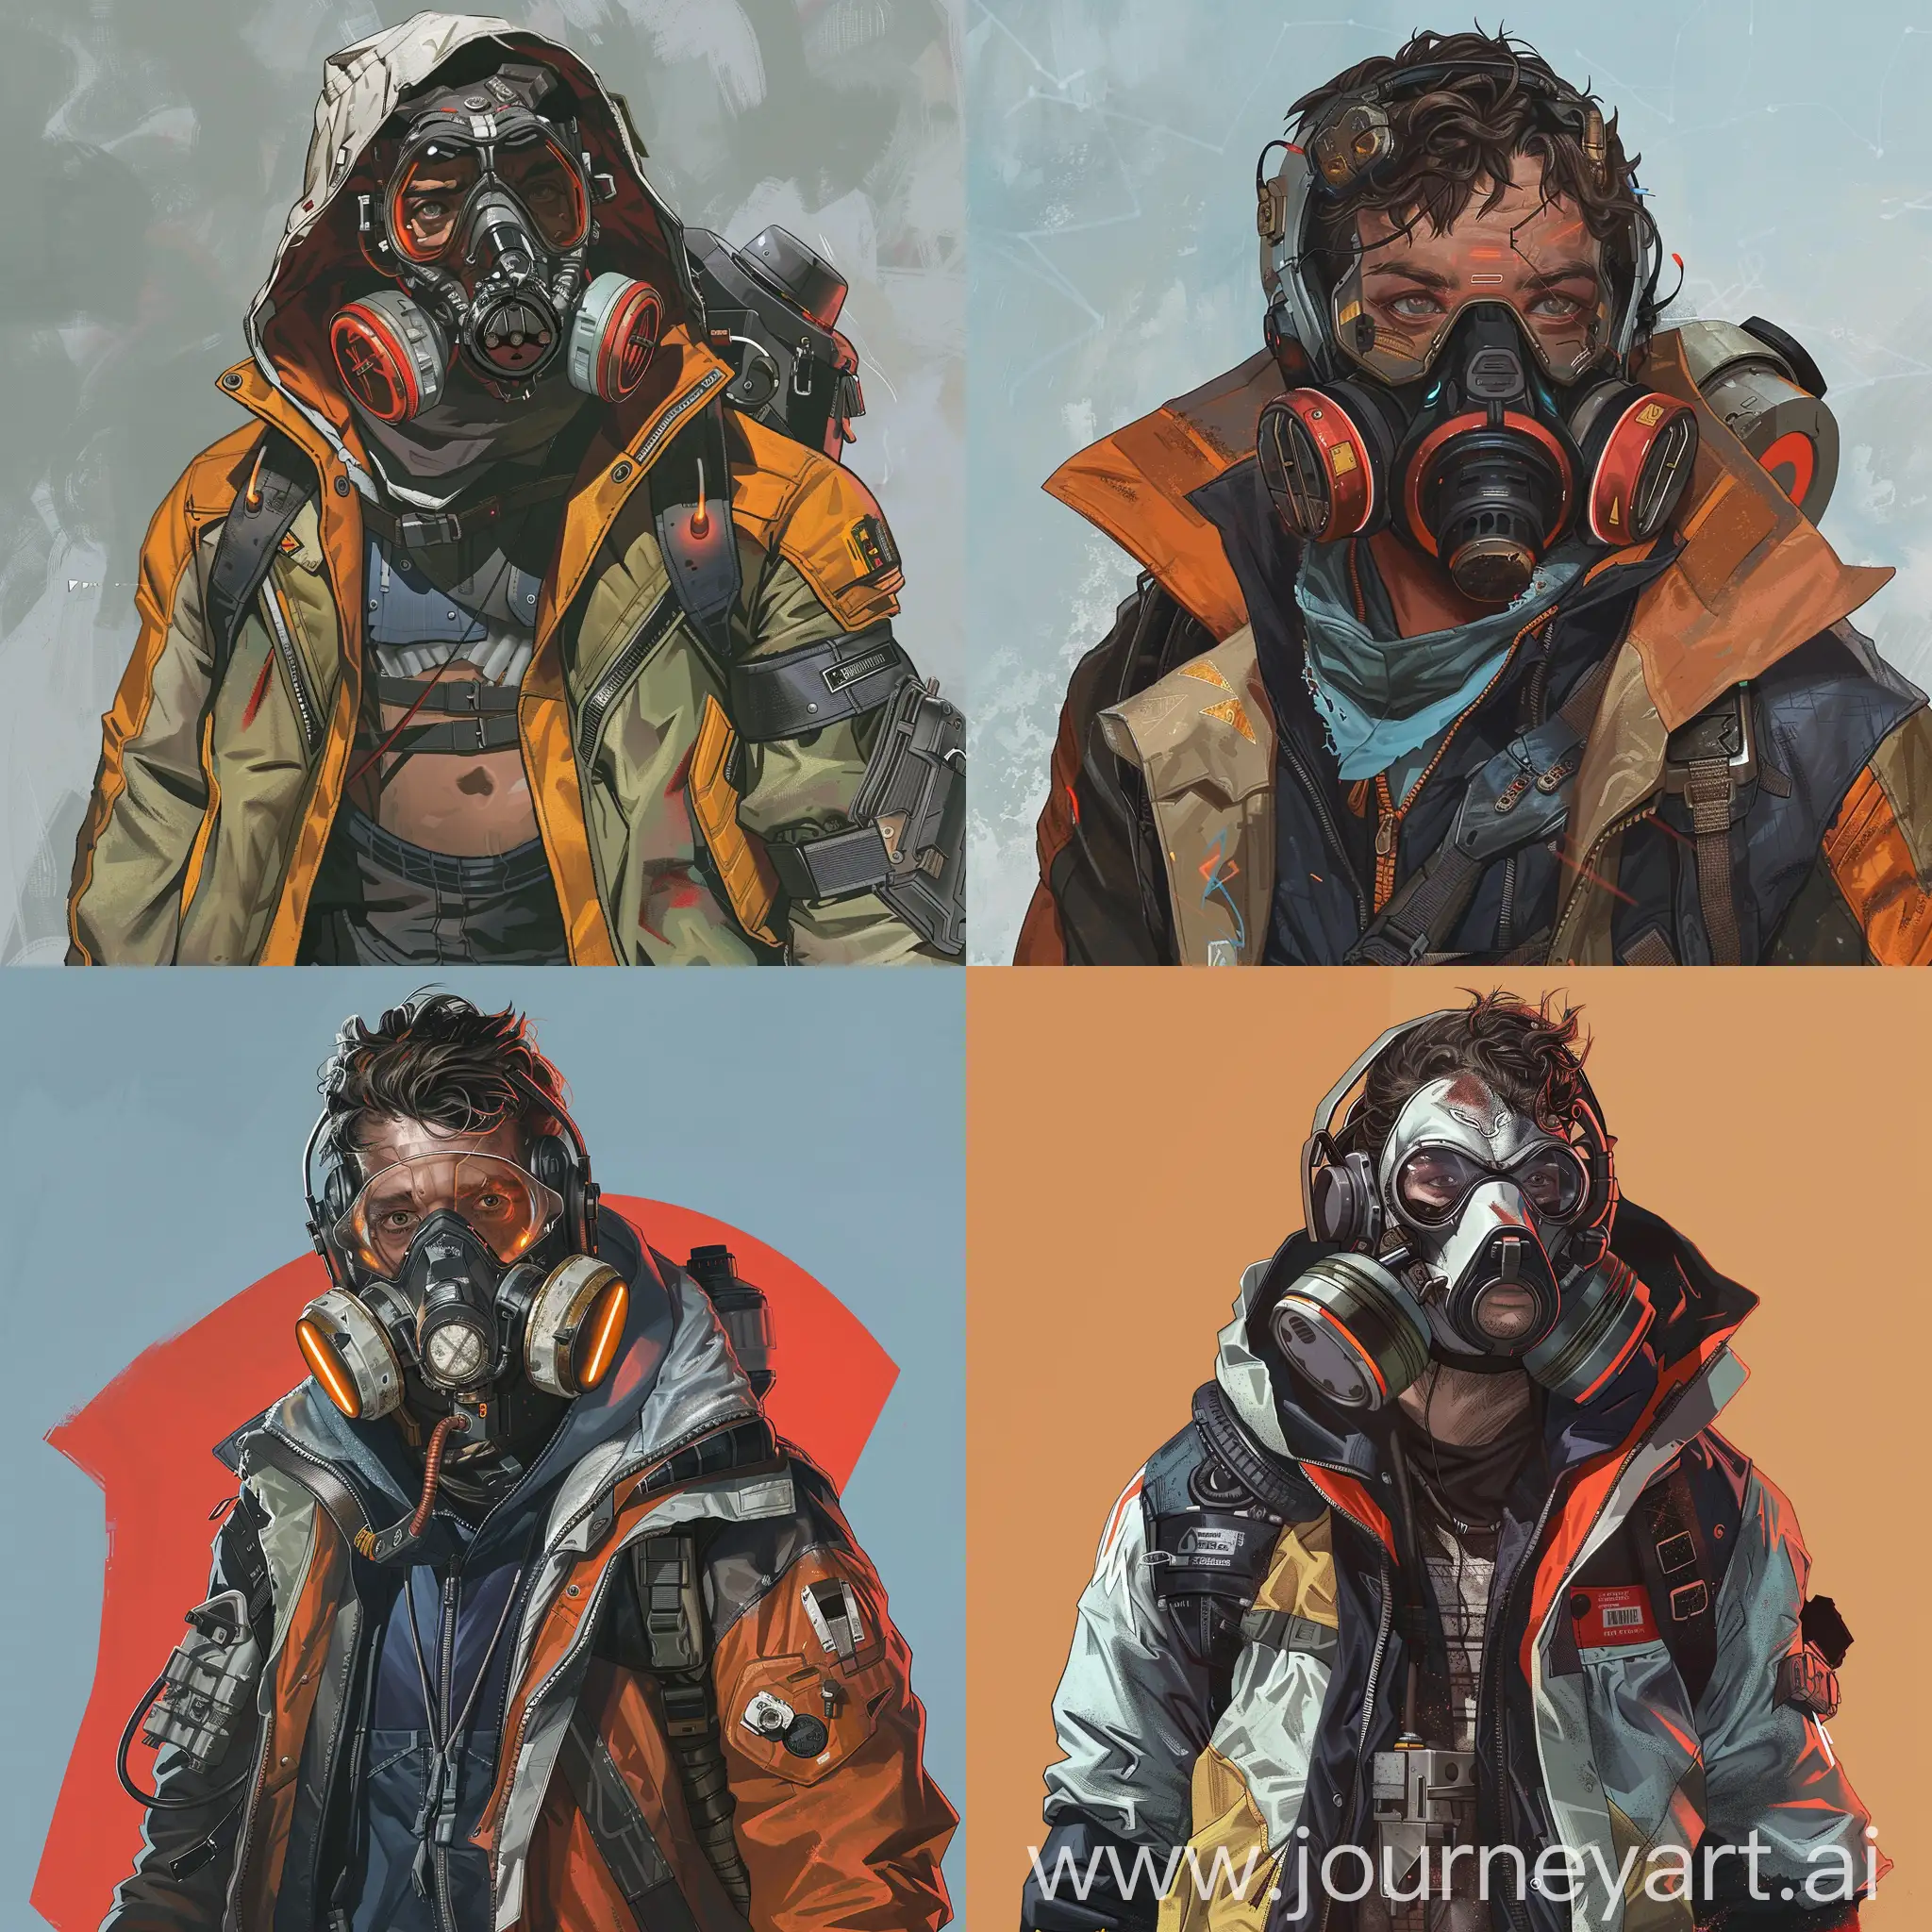 a man wearing a gas mask and jacket, apex legends character, apex legends, disco elysium style, portrait of apex legends, laurie greasley and james jean, disco elysium character, apex legends armor, disco elysium style!!!, disco elysium art, cyberpunk hero, postapocalyptic explorer, disco elysium, disco elysium video game